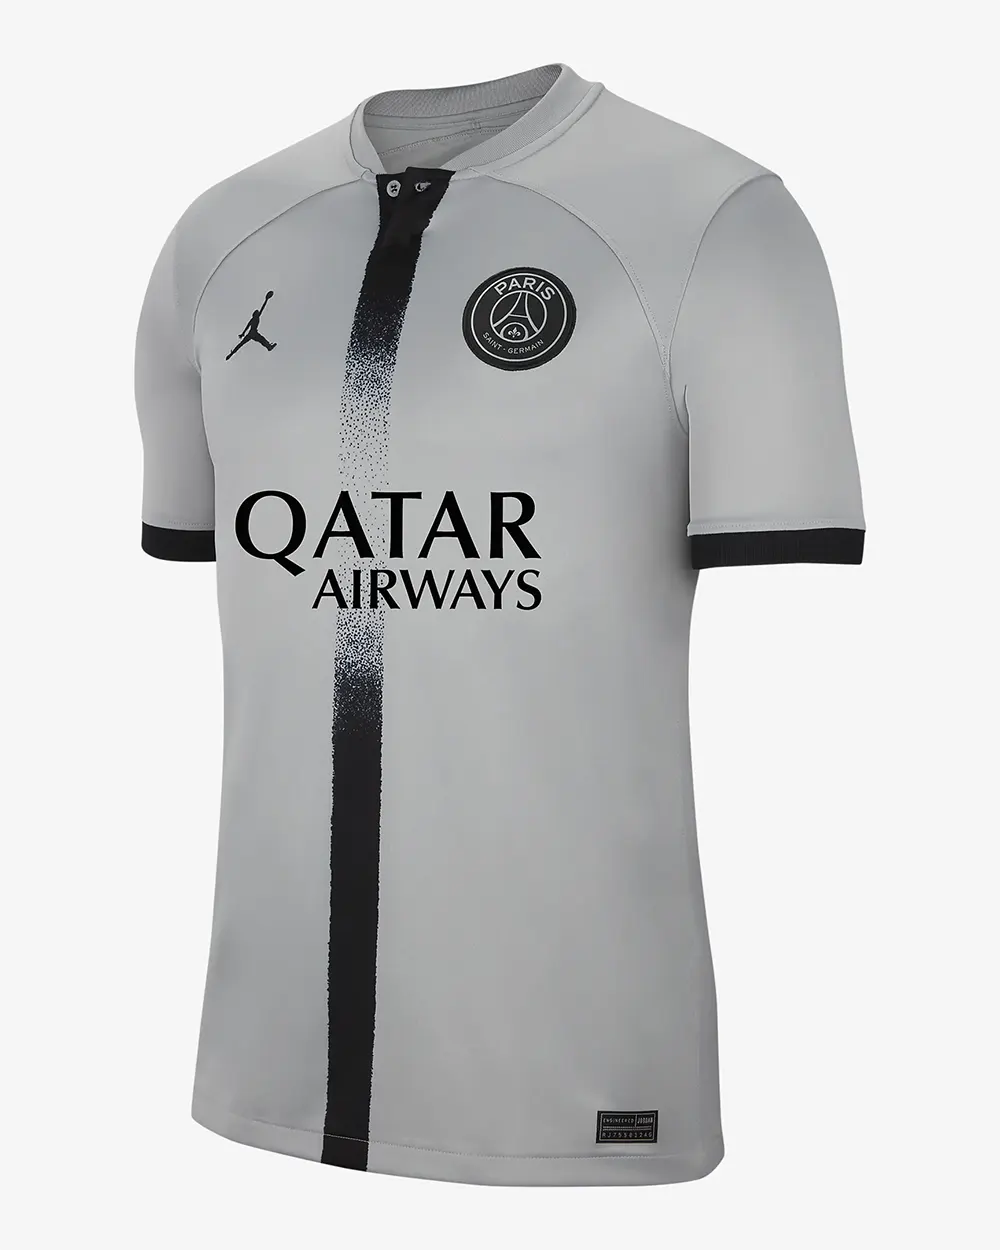 Classic Football Shirts on X: PSG vs Real Madrid Two clubs who have had  fashion inspired shirt designs in the past. In 2006, PSG had this Louis  Vuitton style away shirt while